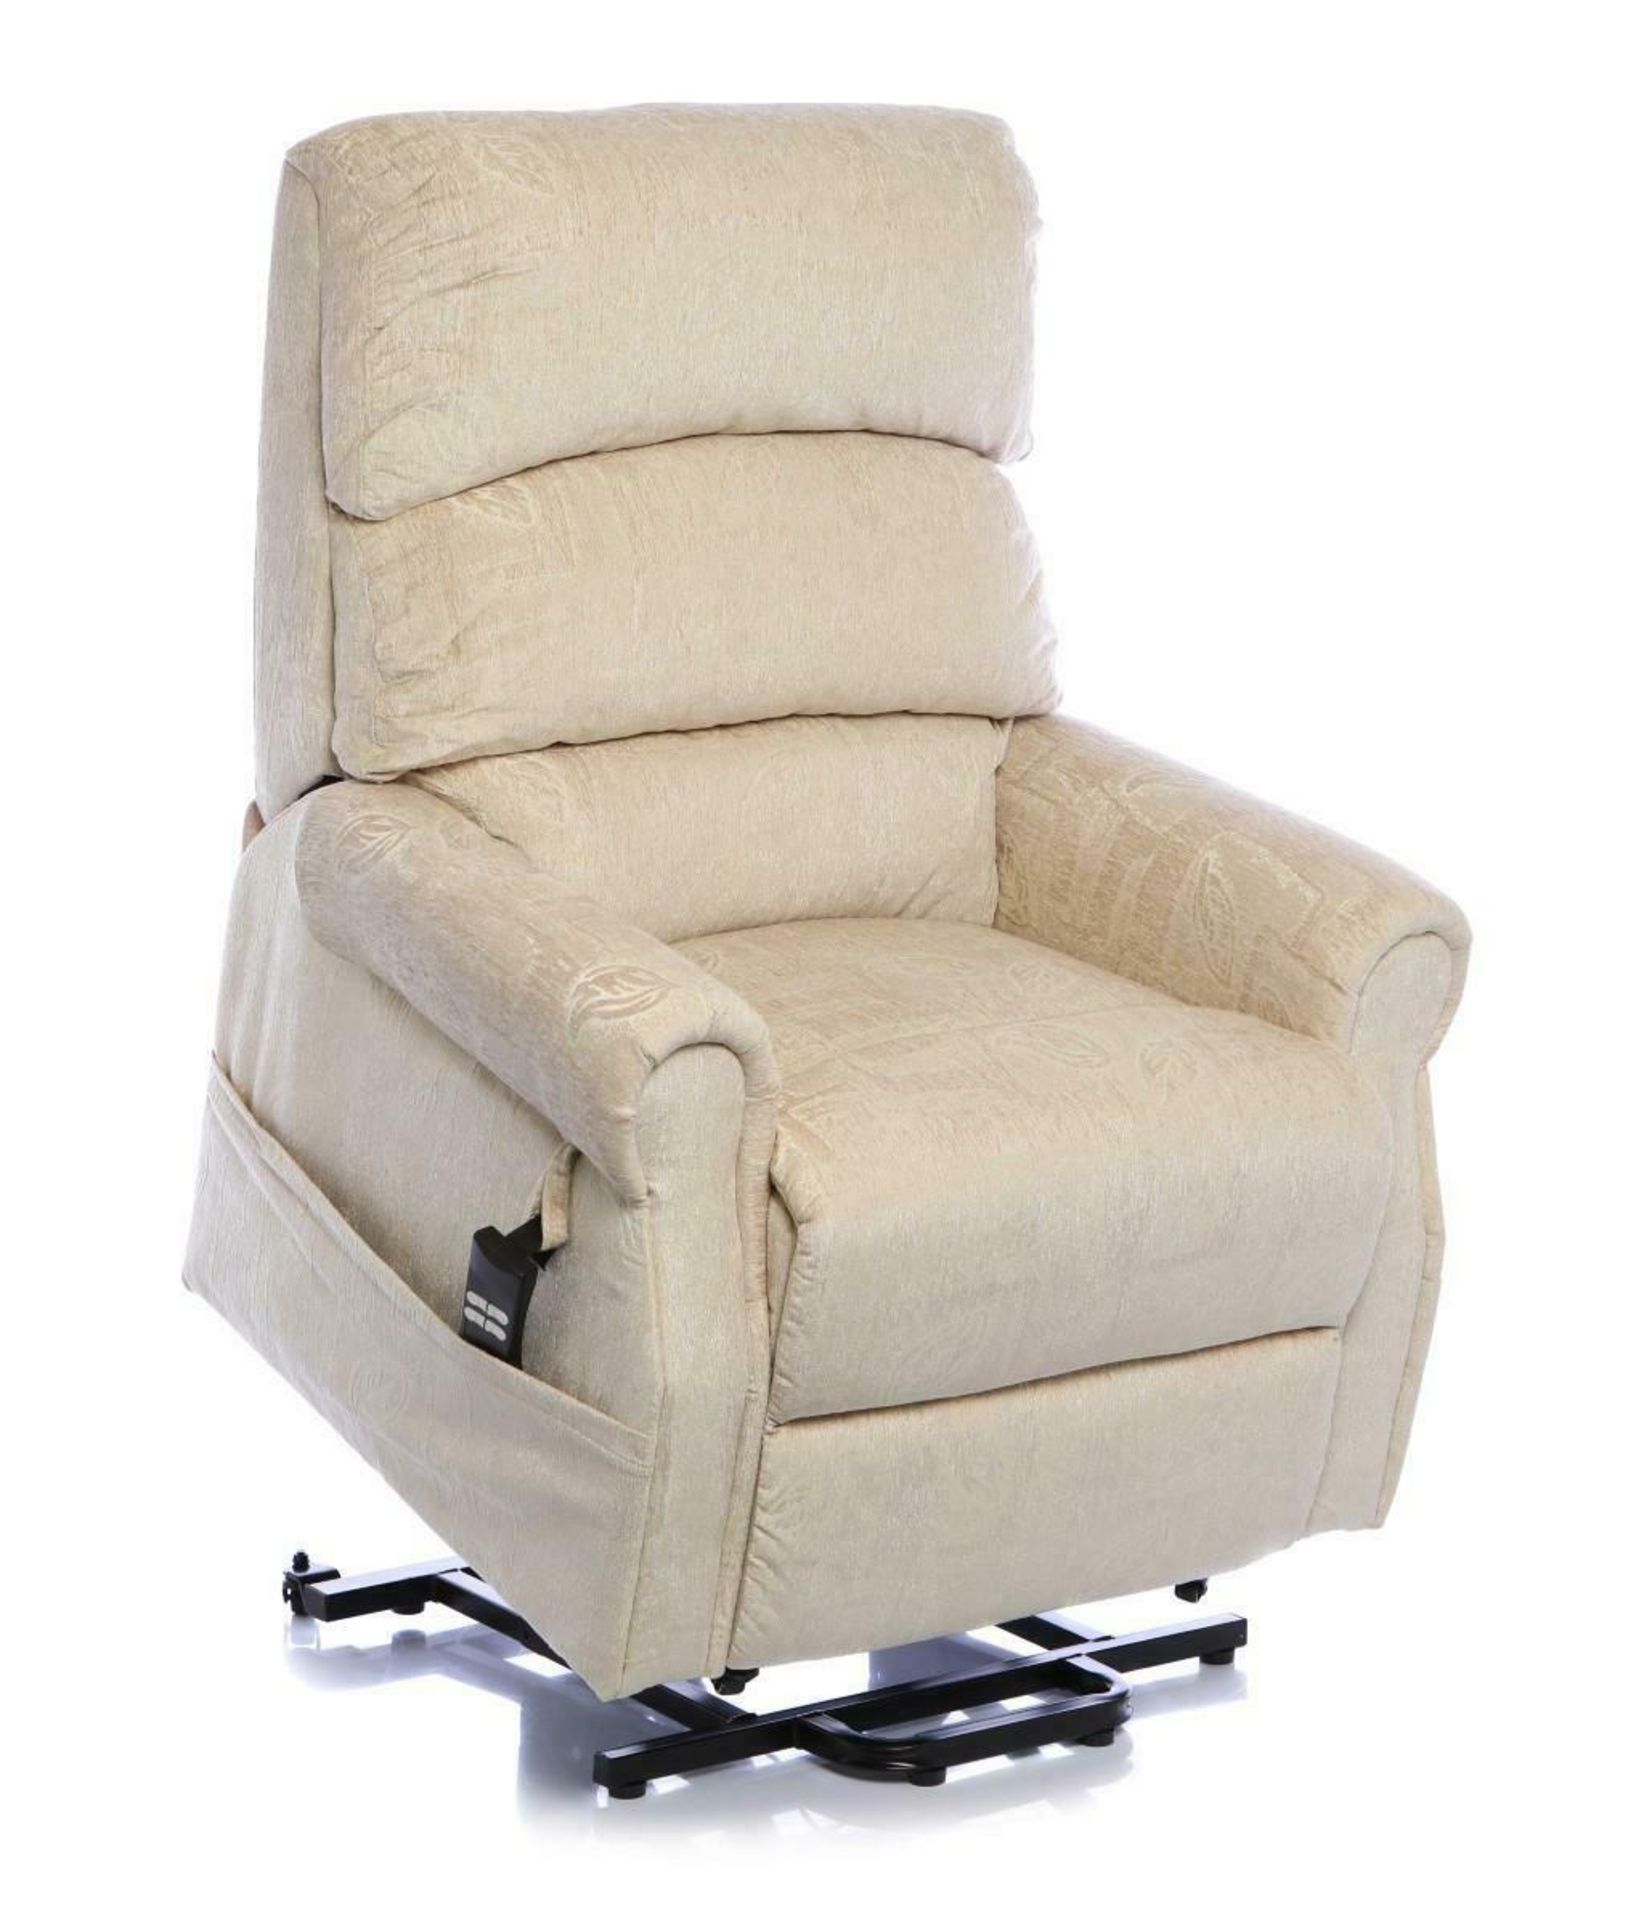 Brand new boxed Augusta dual motor rise/recline electric chair in beige fabric